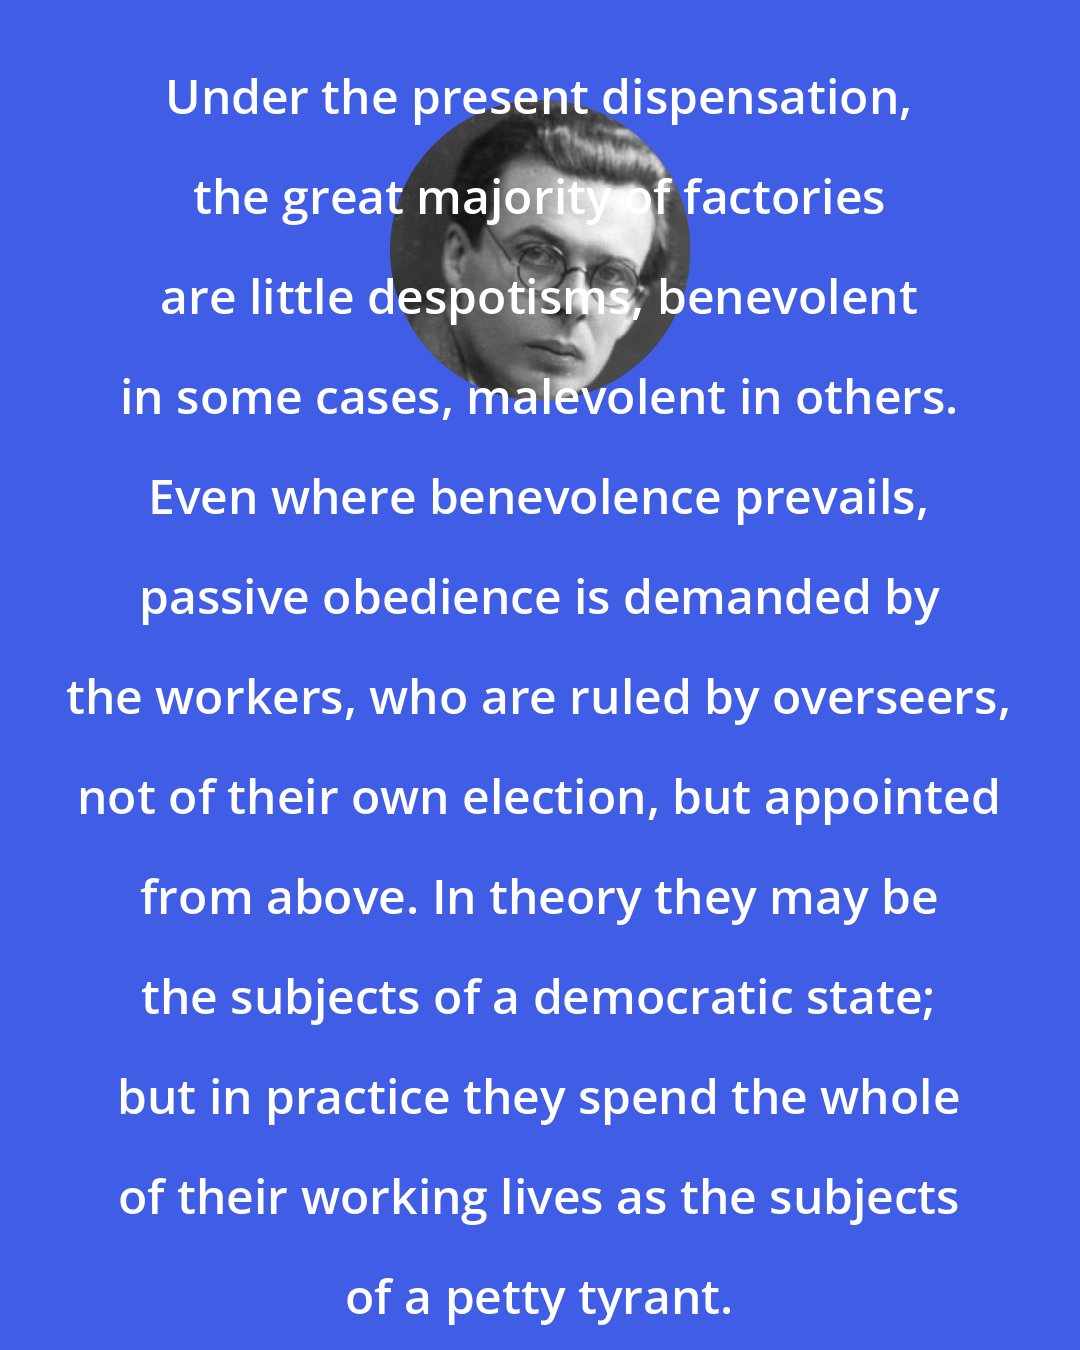 Aldous Huxley: Under the present dispensation, the great majority of factories are little despotisms, benevolent in some cases, malevolent in others. Even where benevolence prevails, passive obedience is demanded by the workers, who are ruled by overseers, not of their own election, but appointed from above. In theory they may be the subjects of a democratic state; but in practice they spend the whole of their working lives as the subjects of a petty tyrant.